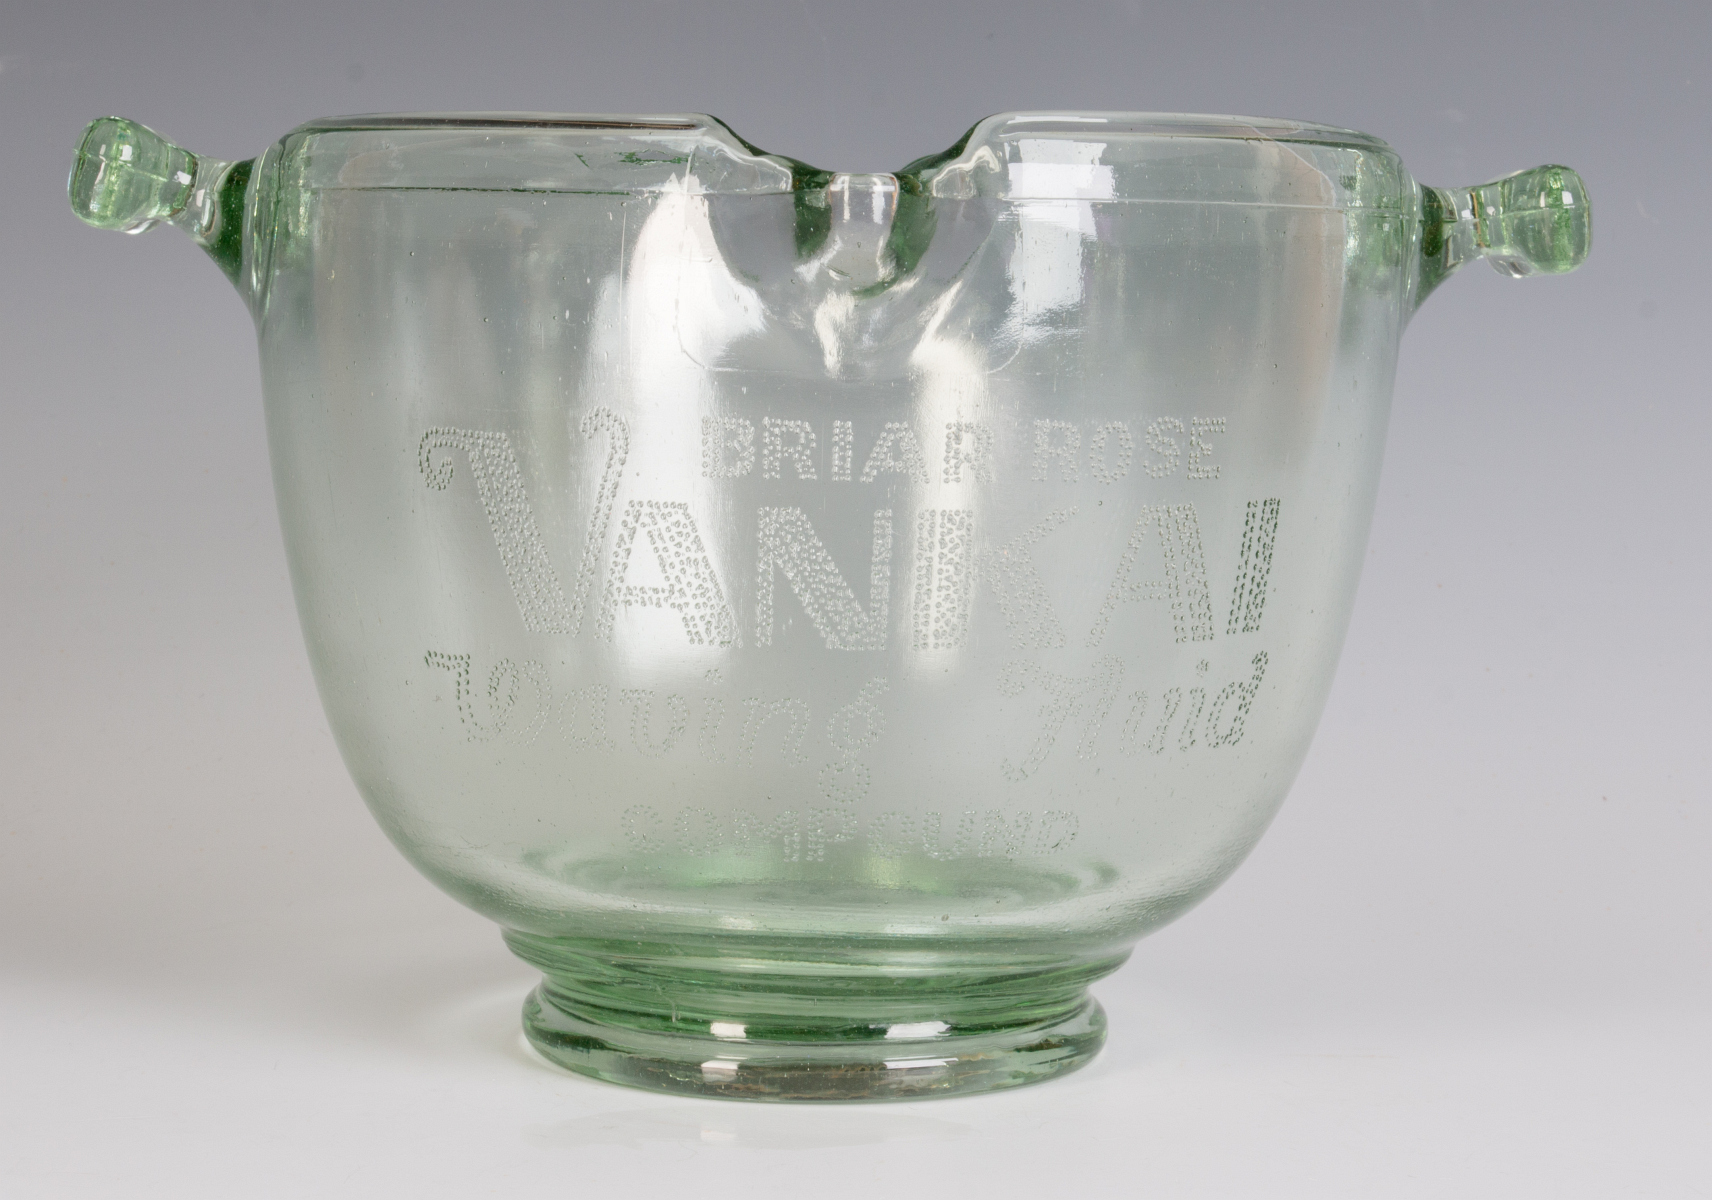 A 1930s GLASS ADVERTISING BOWL, HAIR WAVE COMPOUND